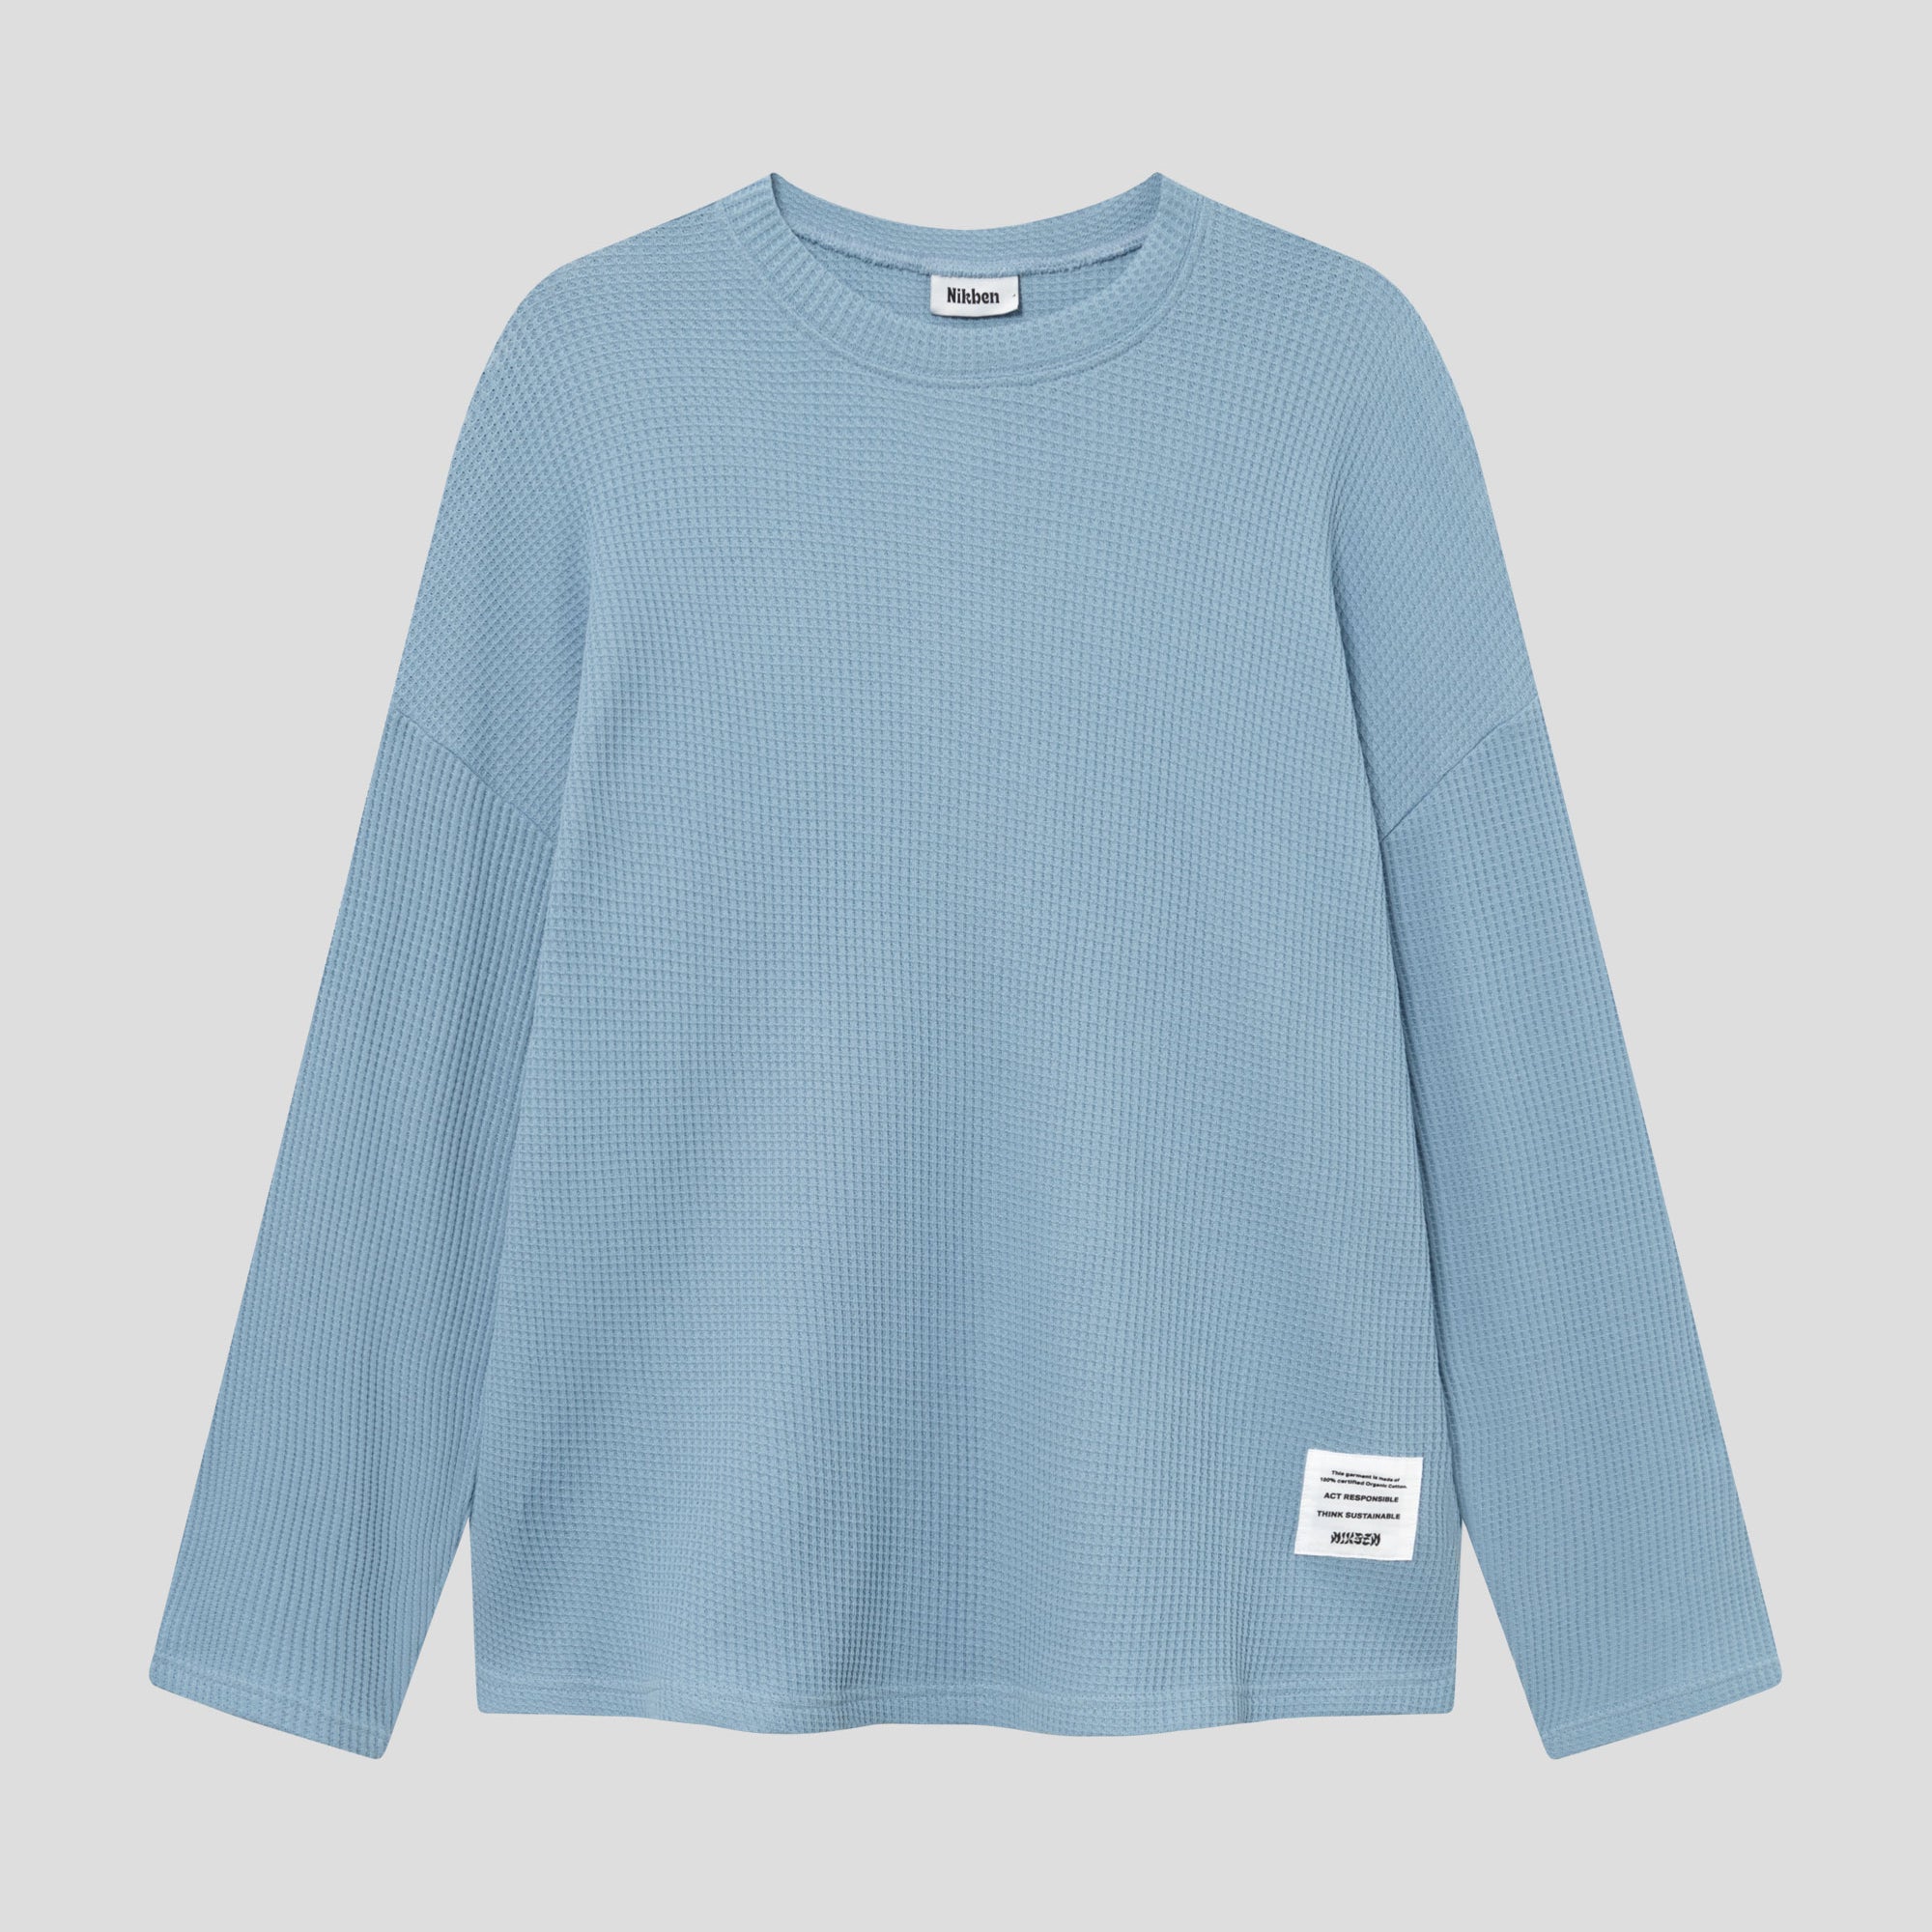 Sky blue waffle-patterned sweatshirt with a stitched-on material label.